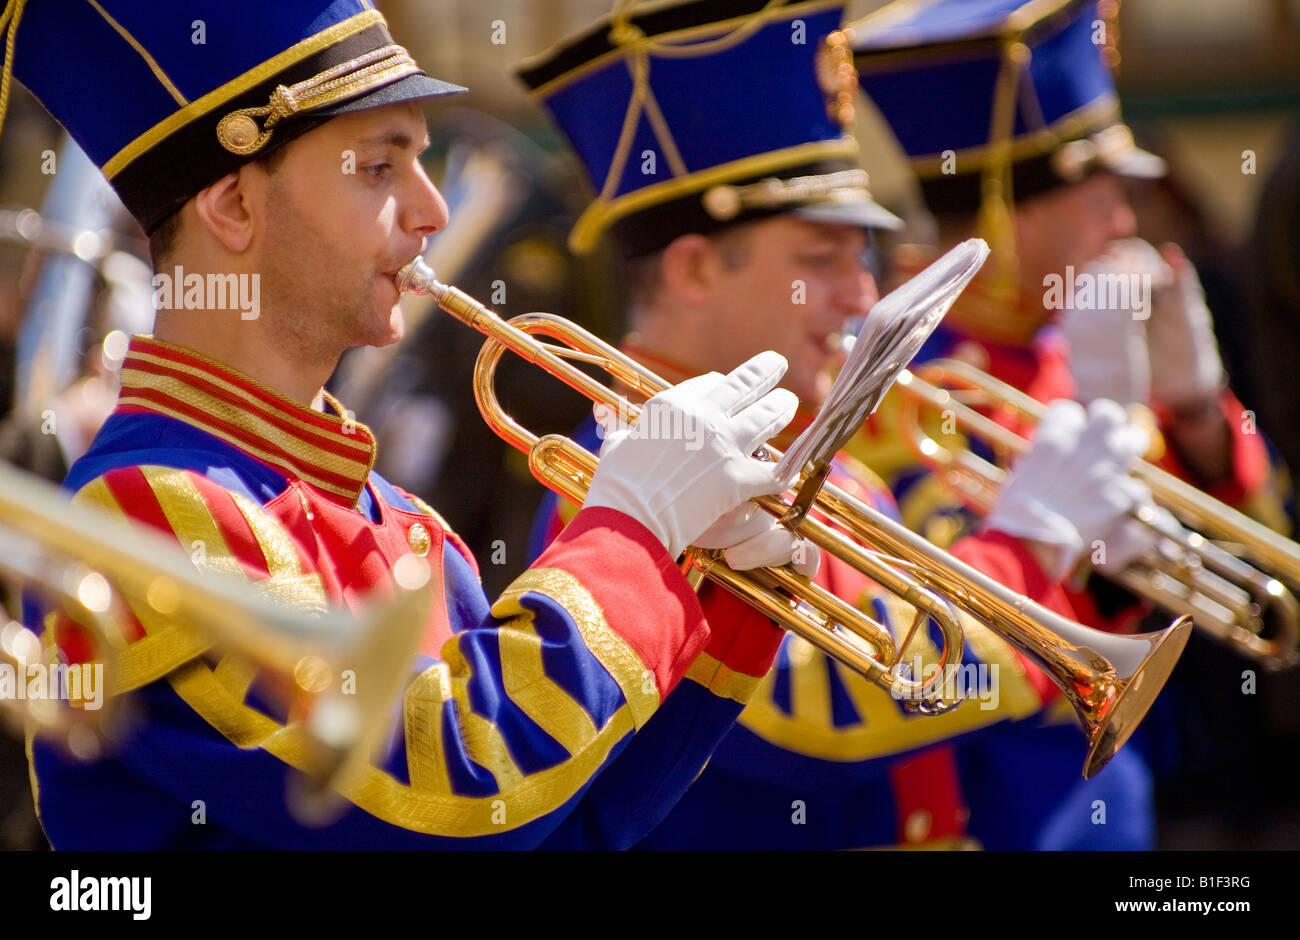 Musicians of the Military Medical Academy band at the Military Bands Festival St Petersburg Russia 12 06 2008 Stock Photo